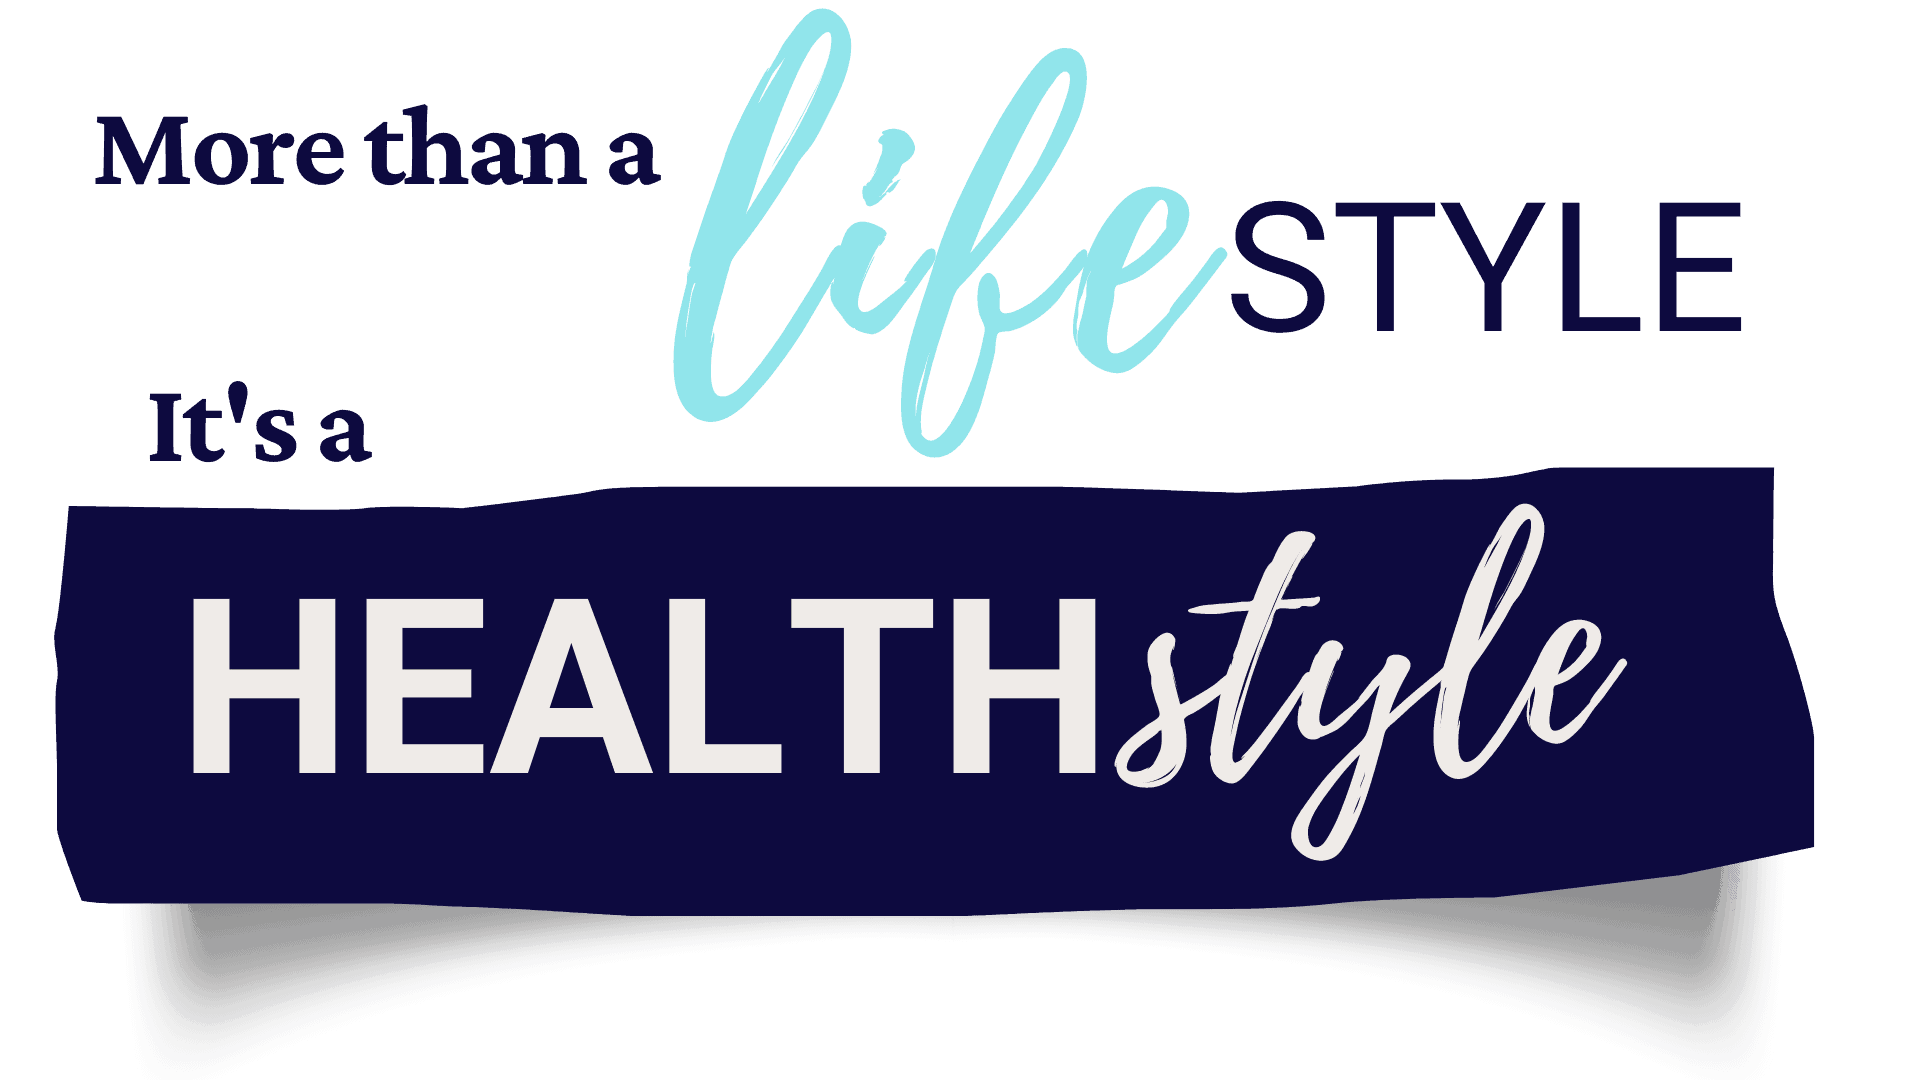 More than a lifestyle, It's a HEALTHstyle